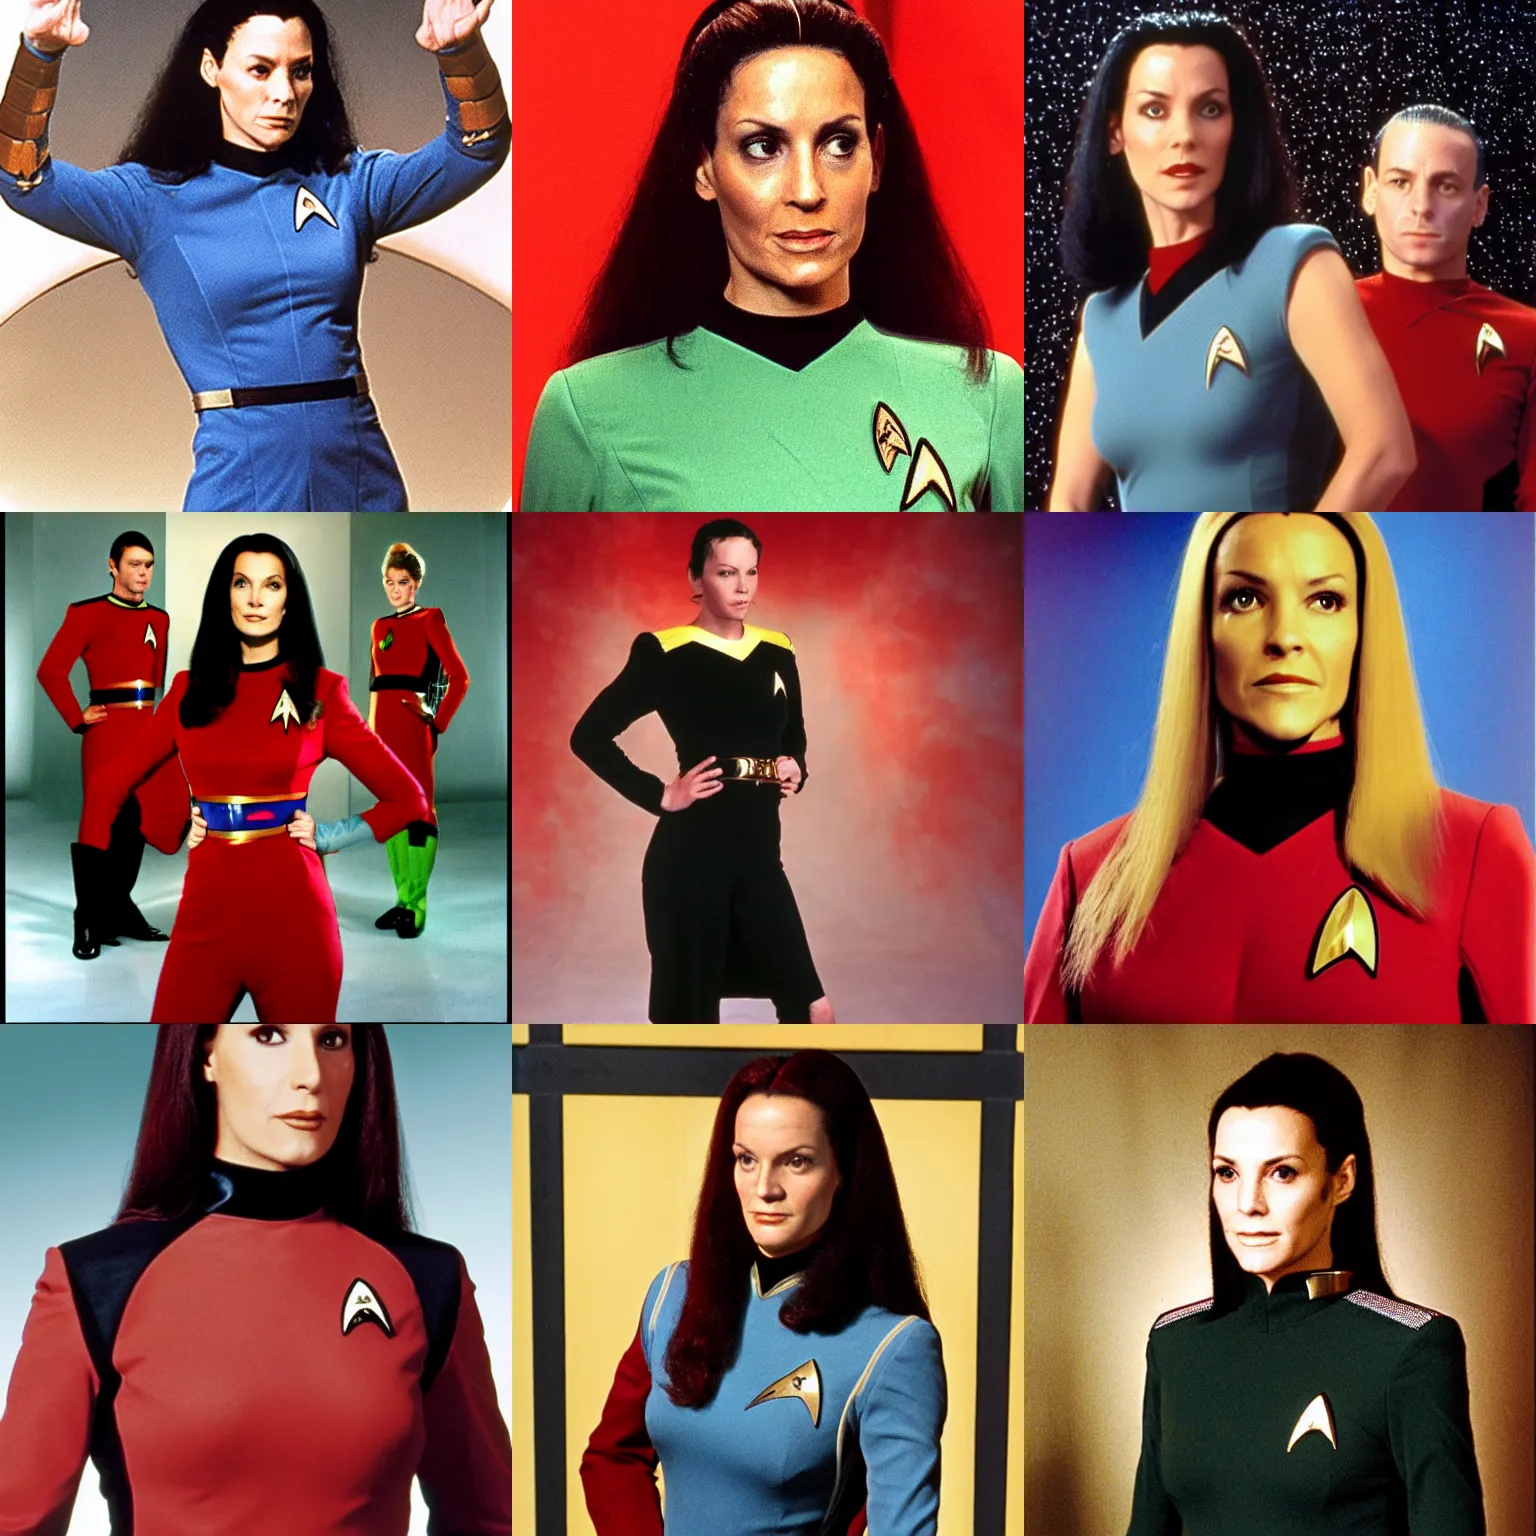 Prompt: lisa mona vinci wearing a captain's uniform from star trek the next generation red uniform with black shoulders and four pips